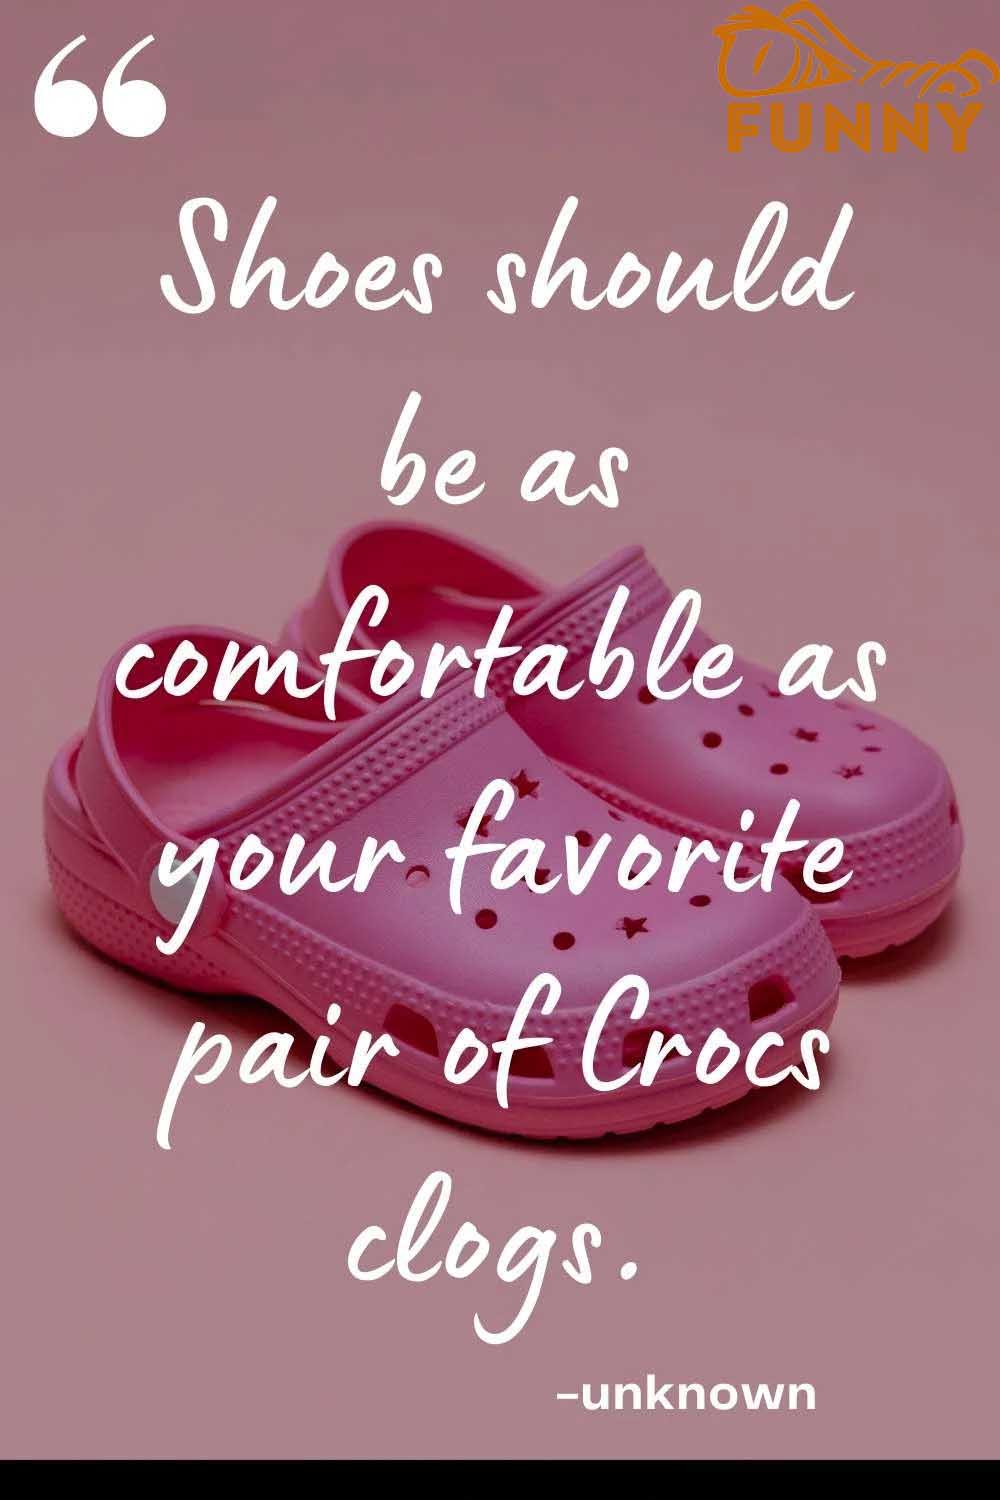 Shoes should be as comfortable as your favorite pair of Crocs clogs